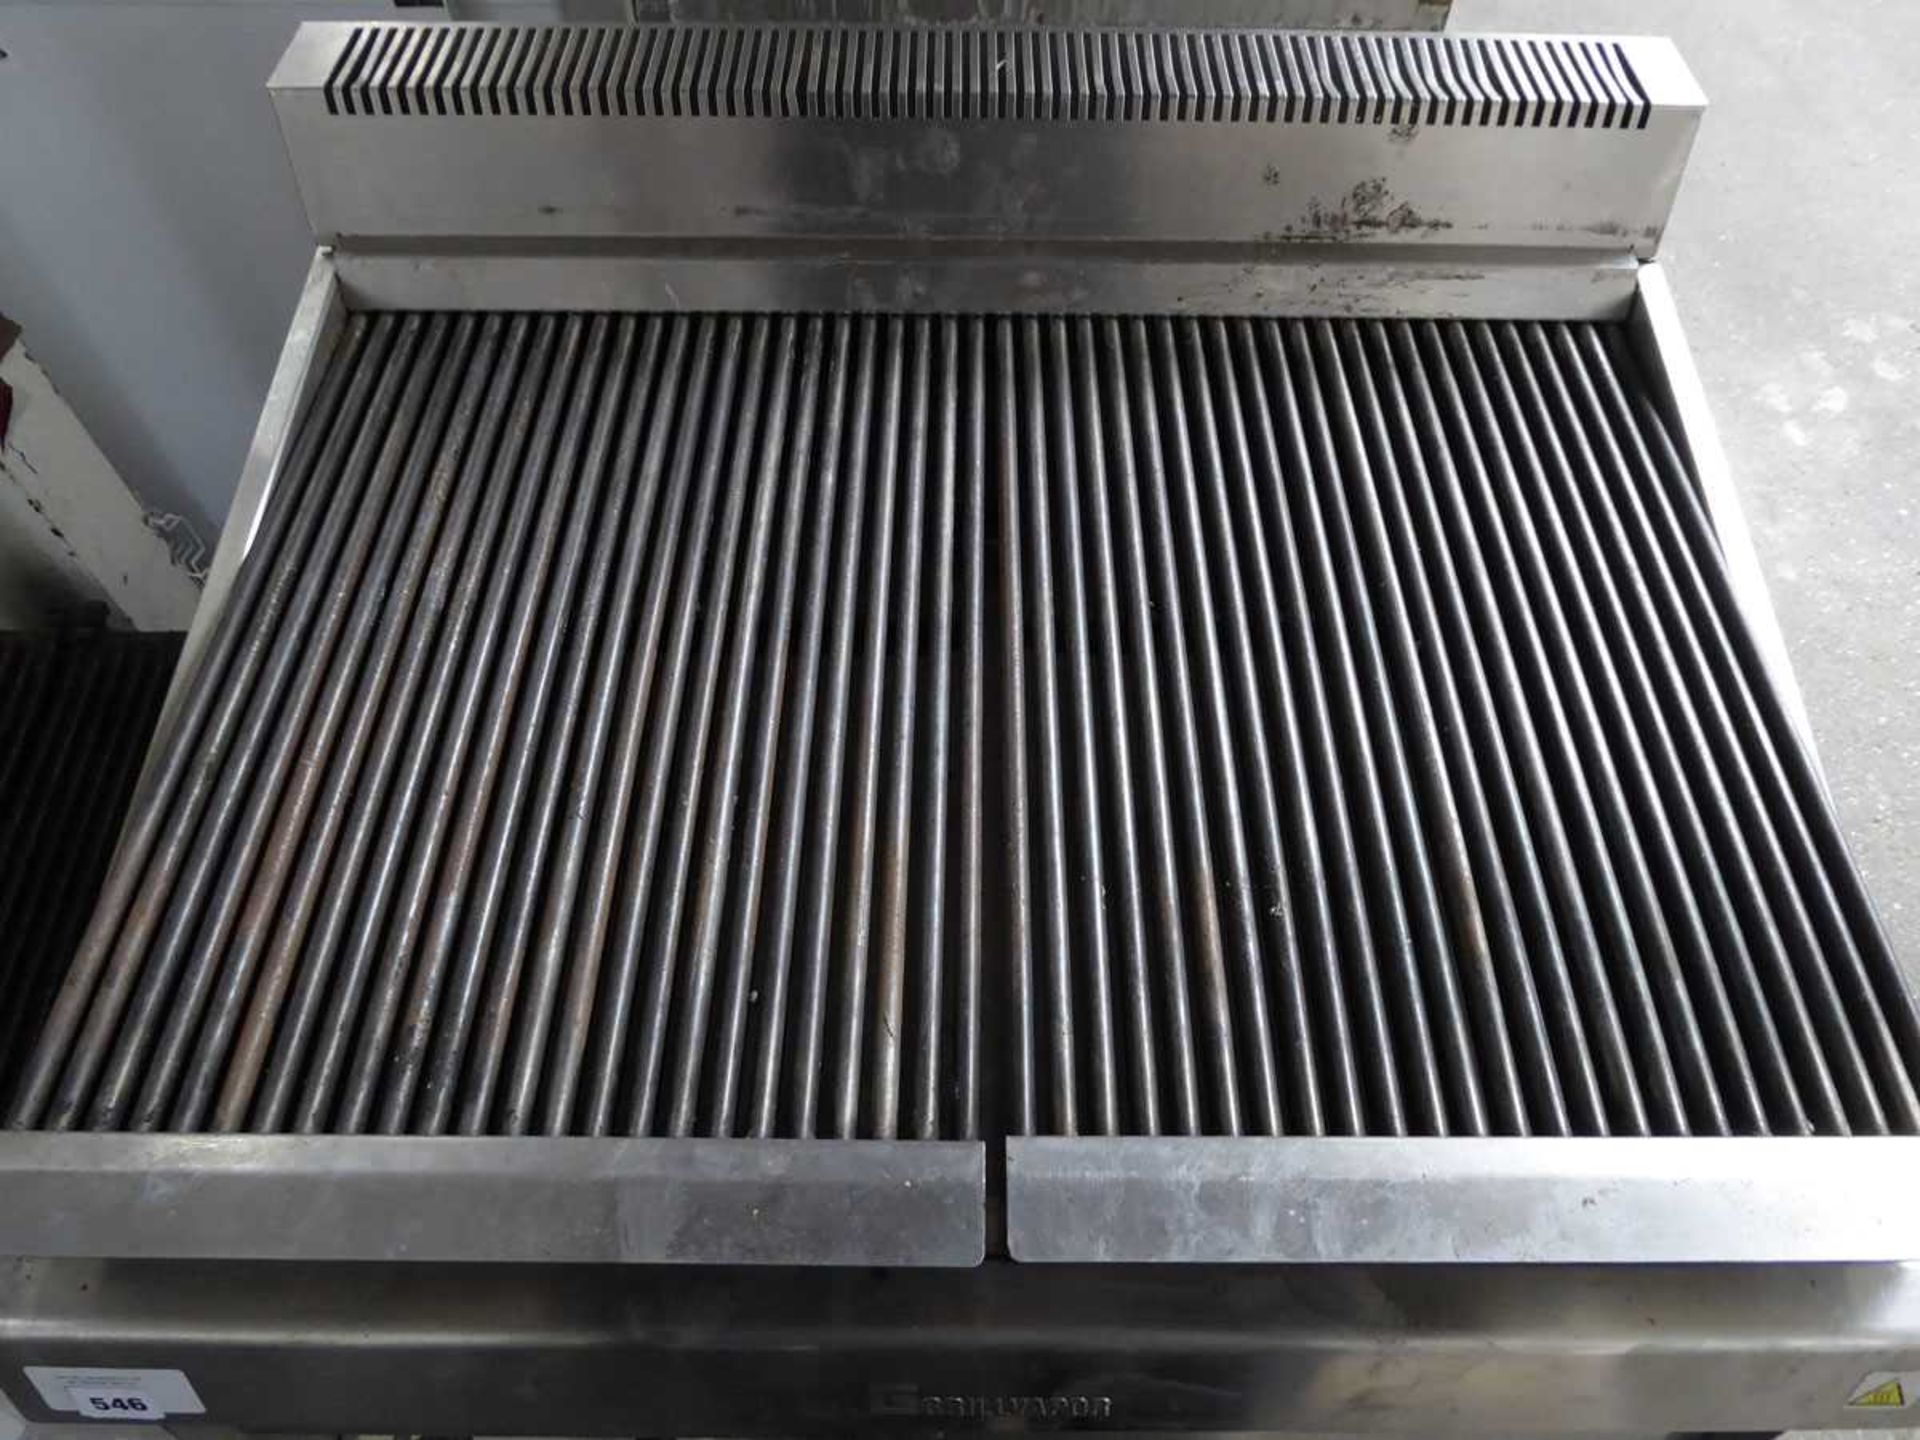 +VAT 80cm electric Grillvapor ribbed chargrill unit - Image 2 of 2